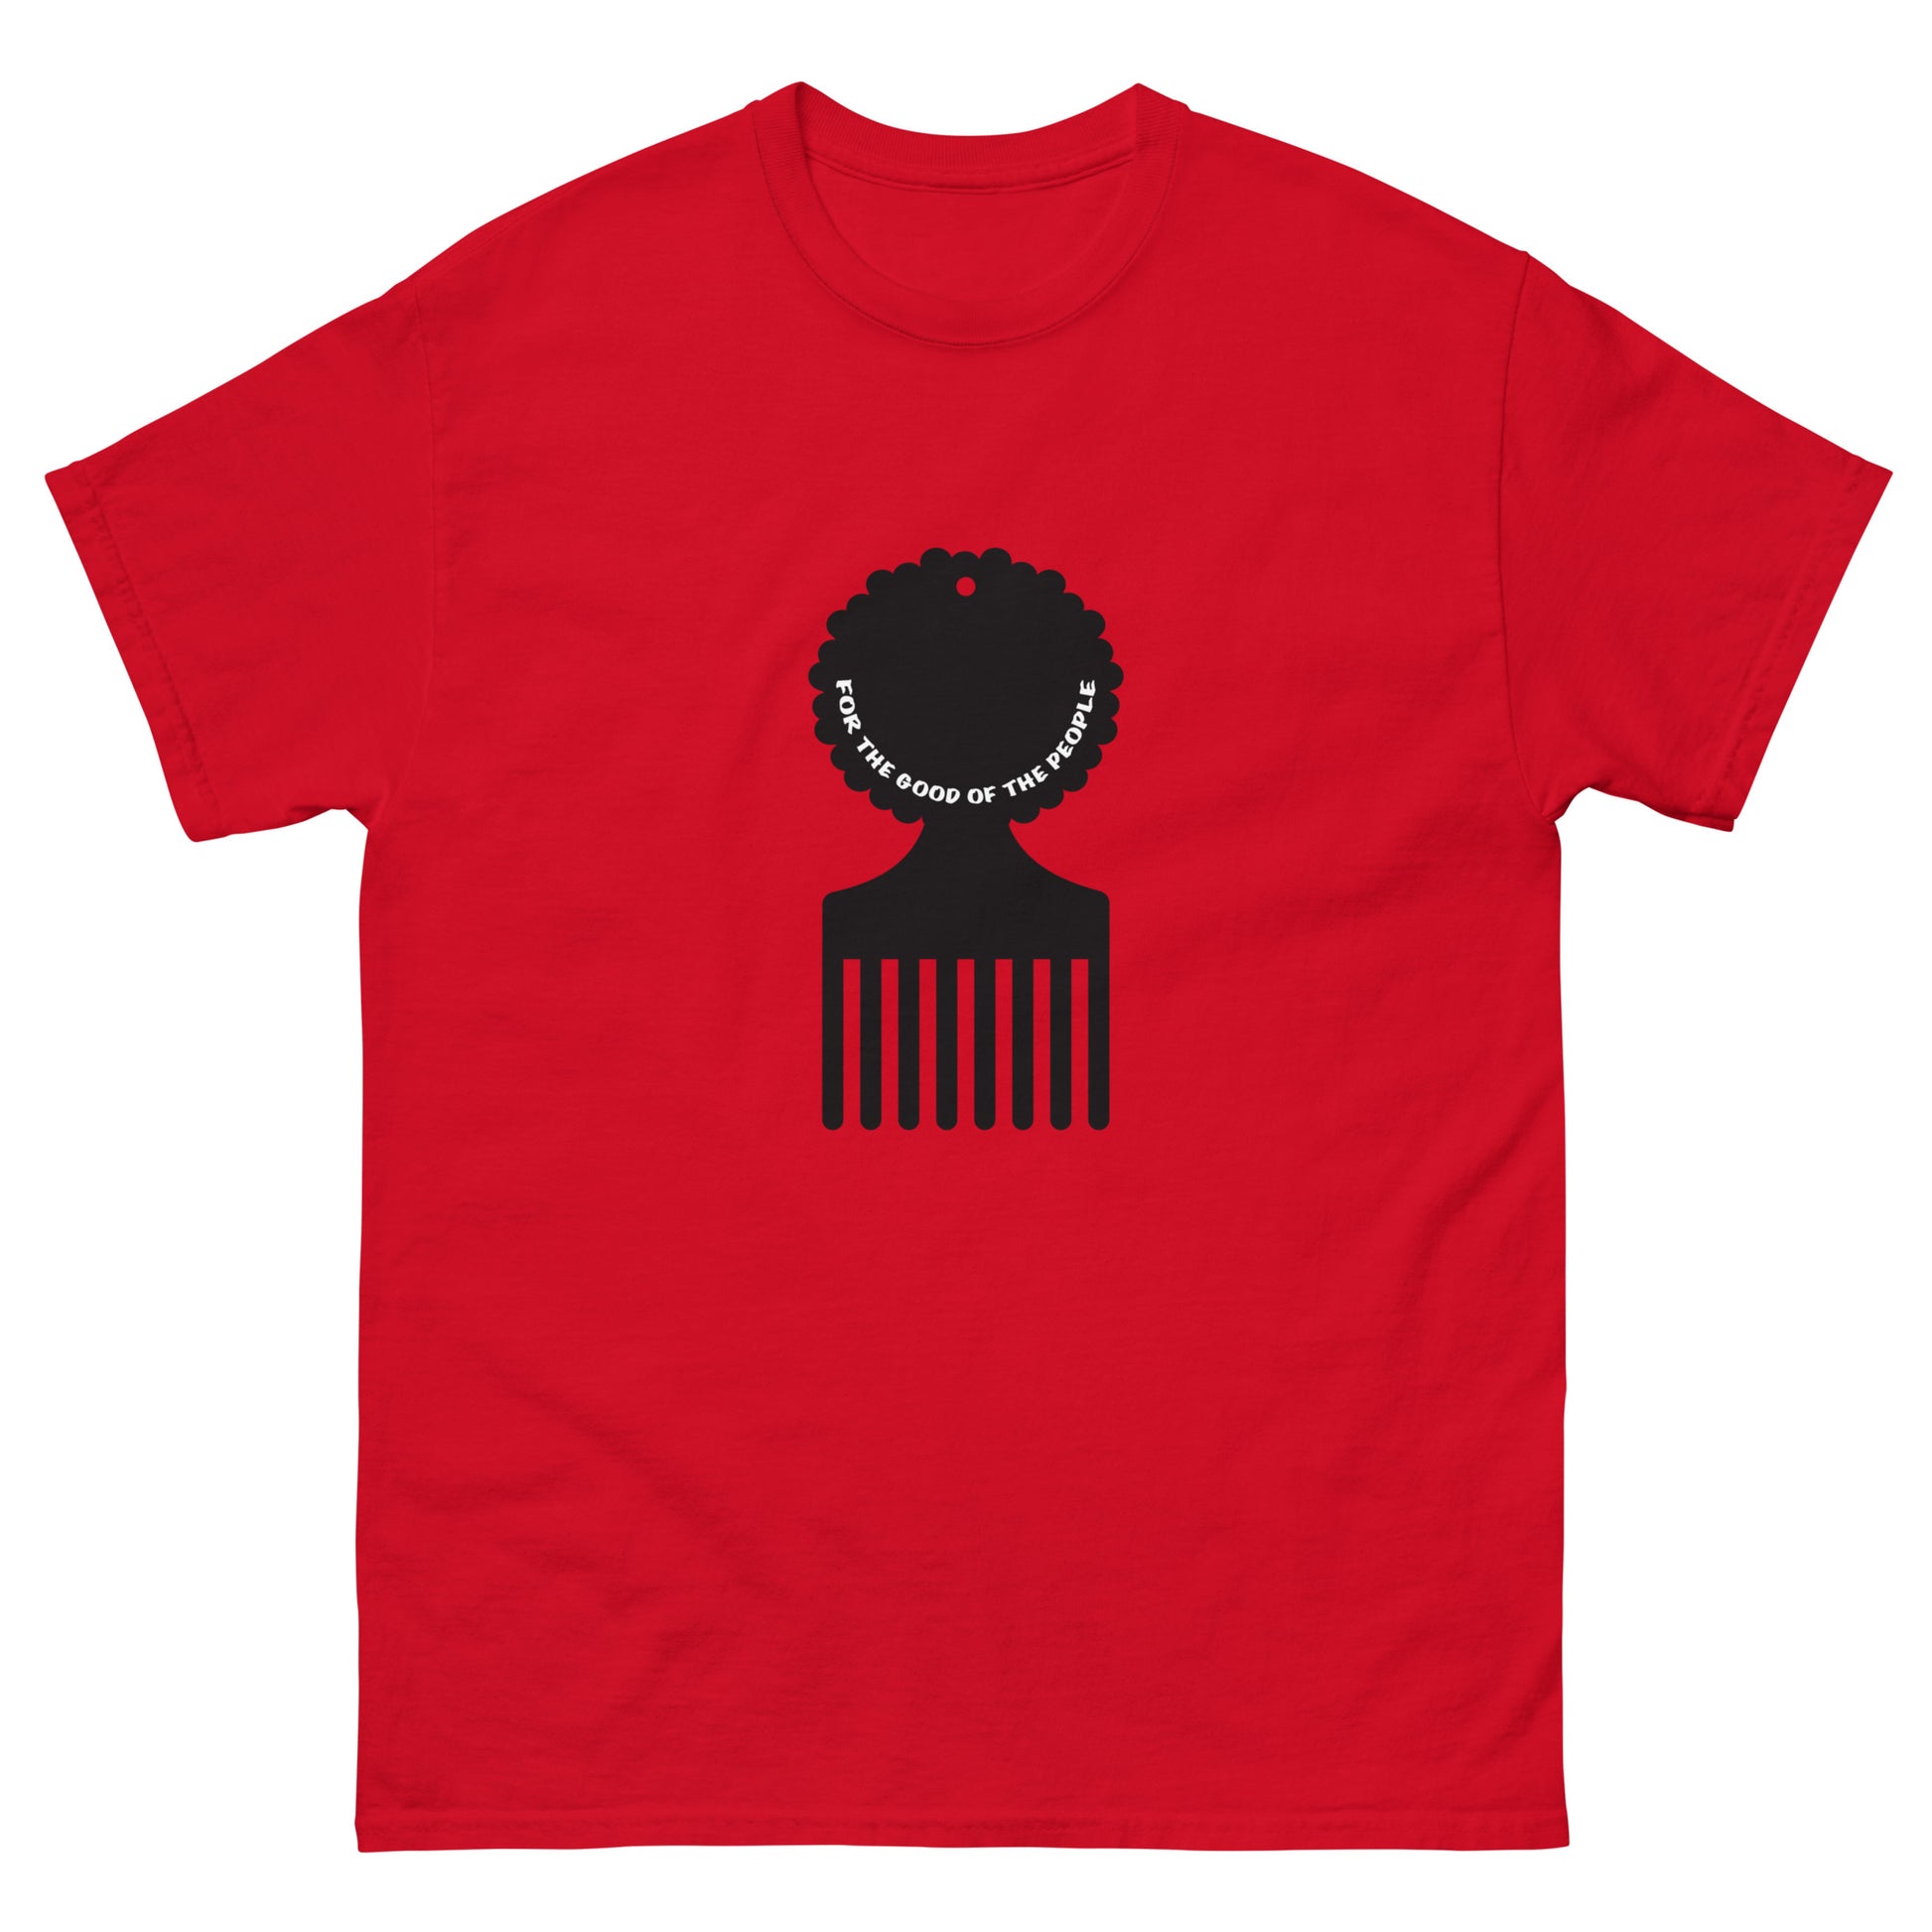 Men's red tee with black afro pick in the center of shirt, with for the good of the people in white inside the afro pick's handle.